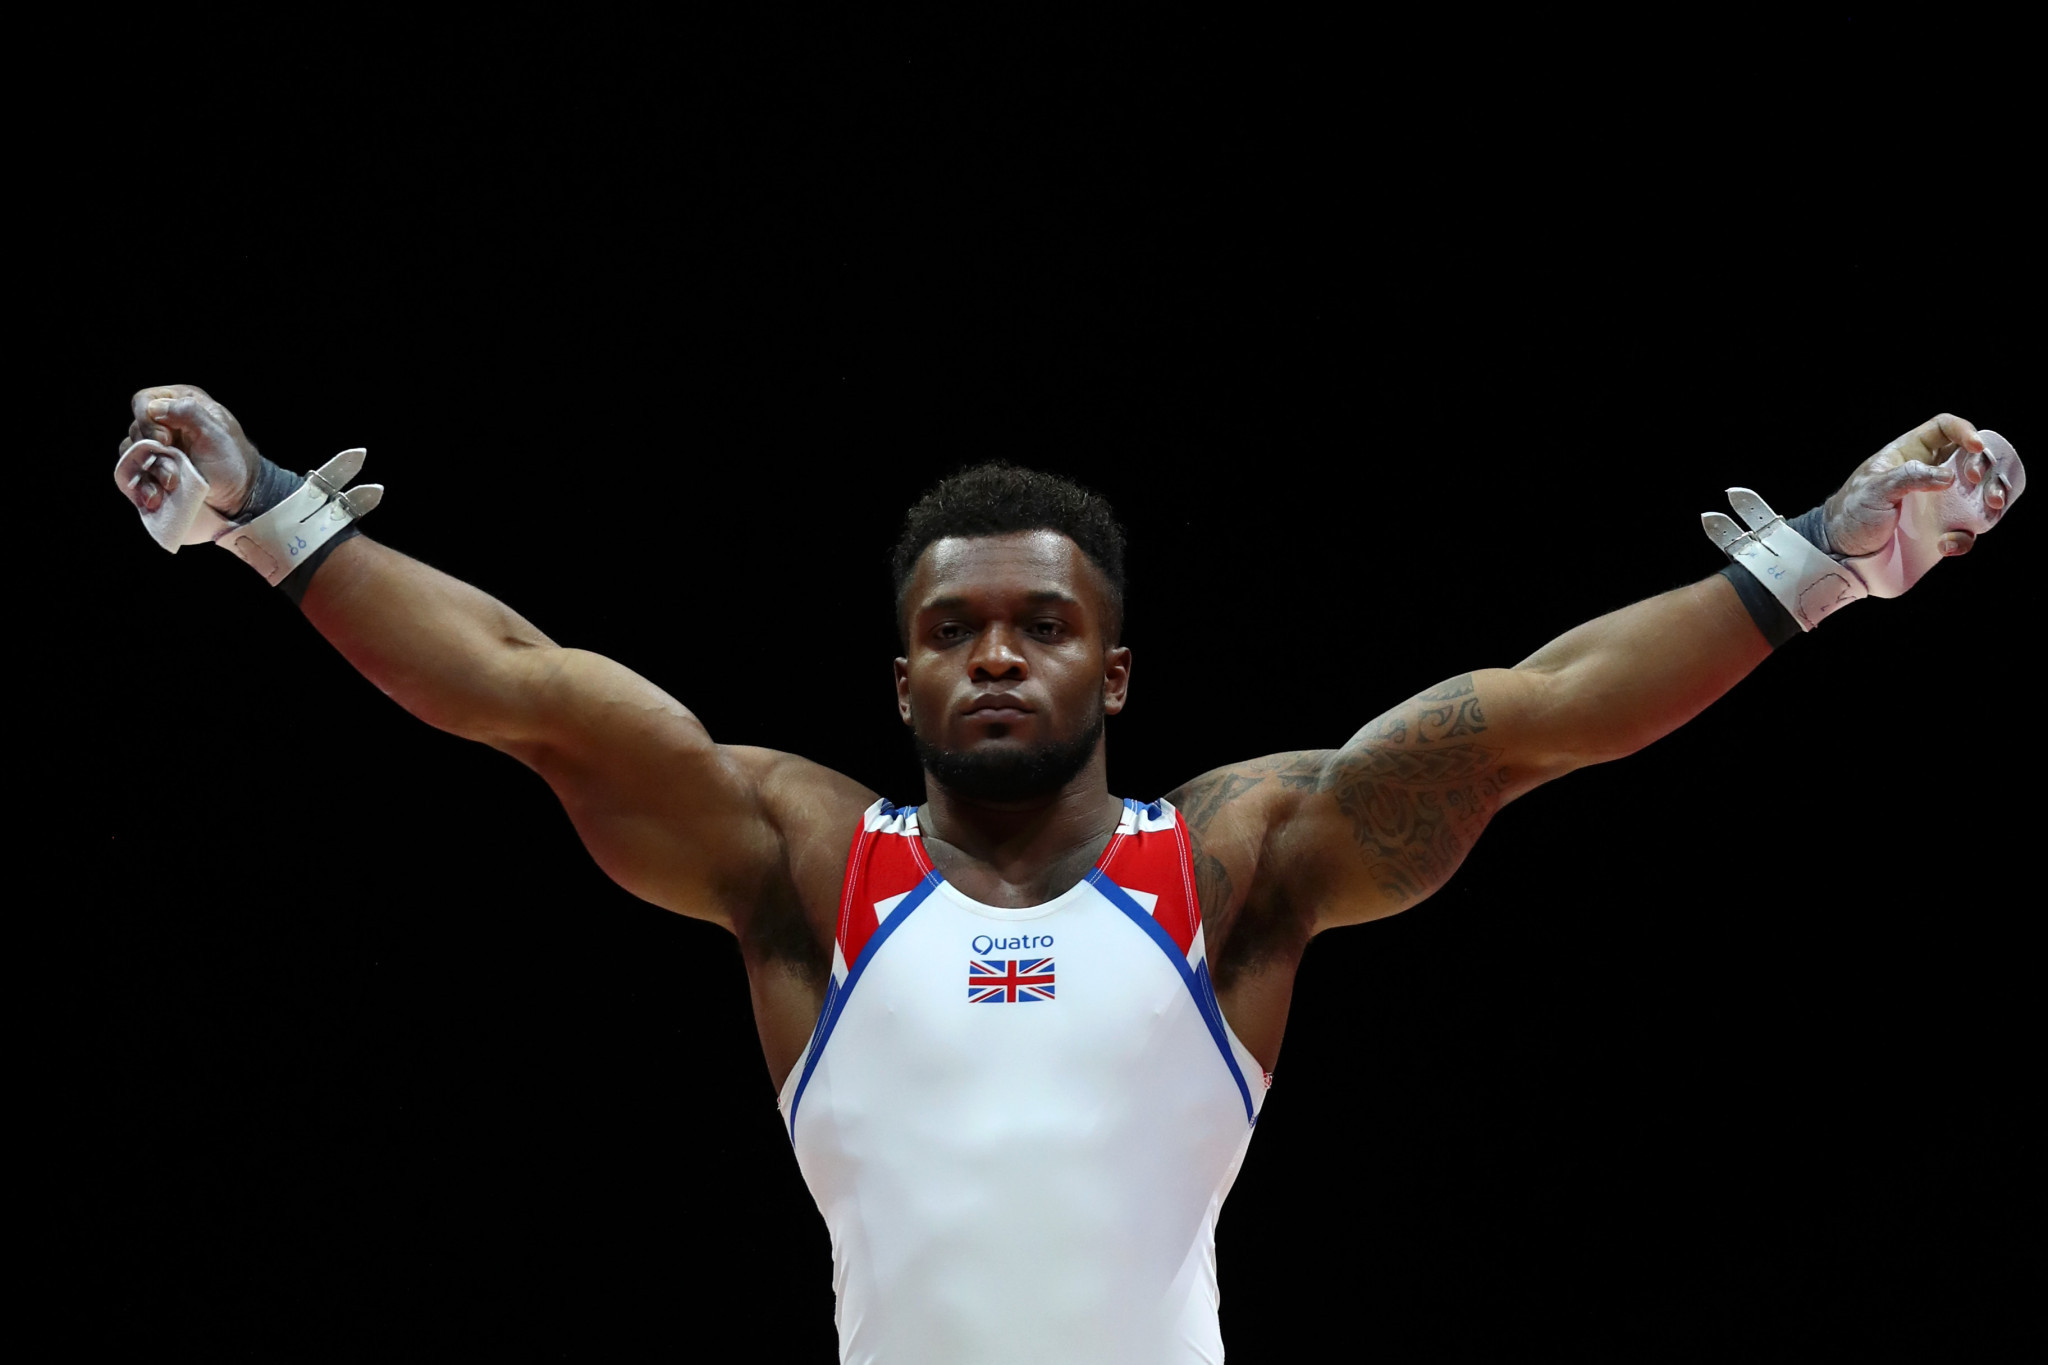 Commonwealth champion Tulloch wins men's rings at FIG Individual Apparatus World Cup in Baku